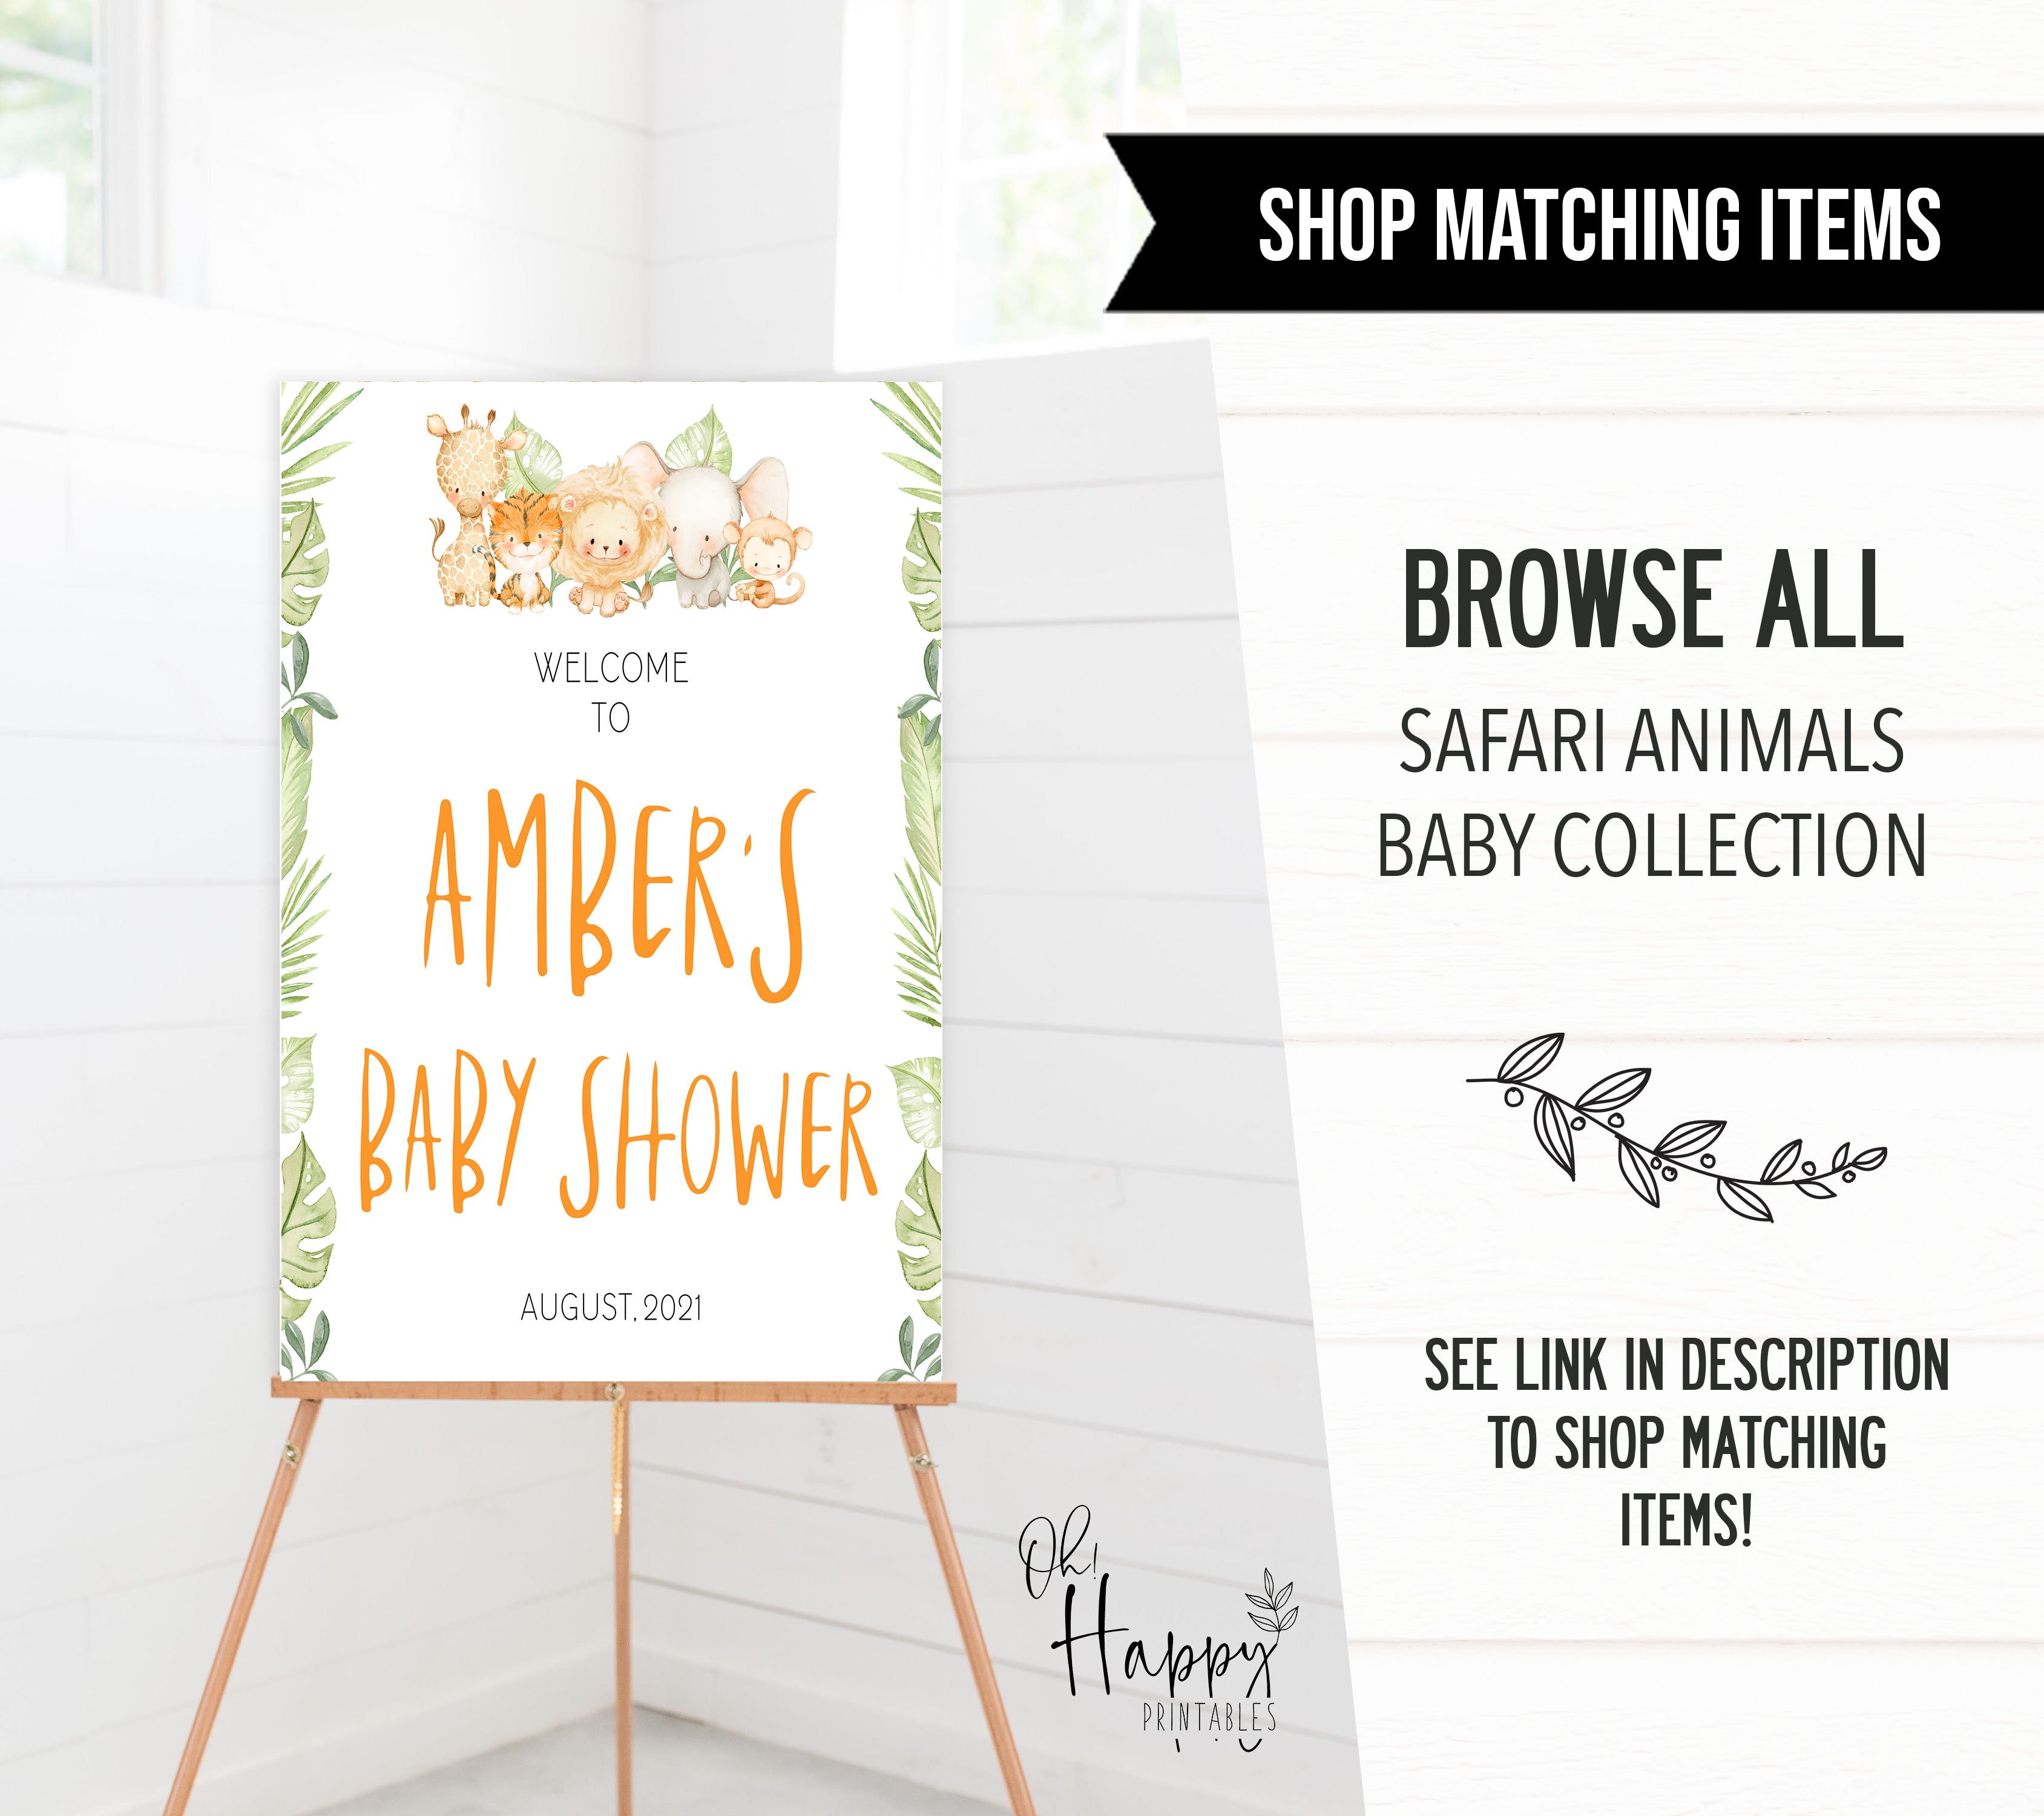 baby name suggestions game, Printable baby shower games, safari animals baby games, baby shower games, fun baby shower ideas, top baby shower ideas, safari animals baby shower, baby shower games, fun baby shower ideas